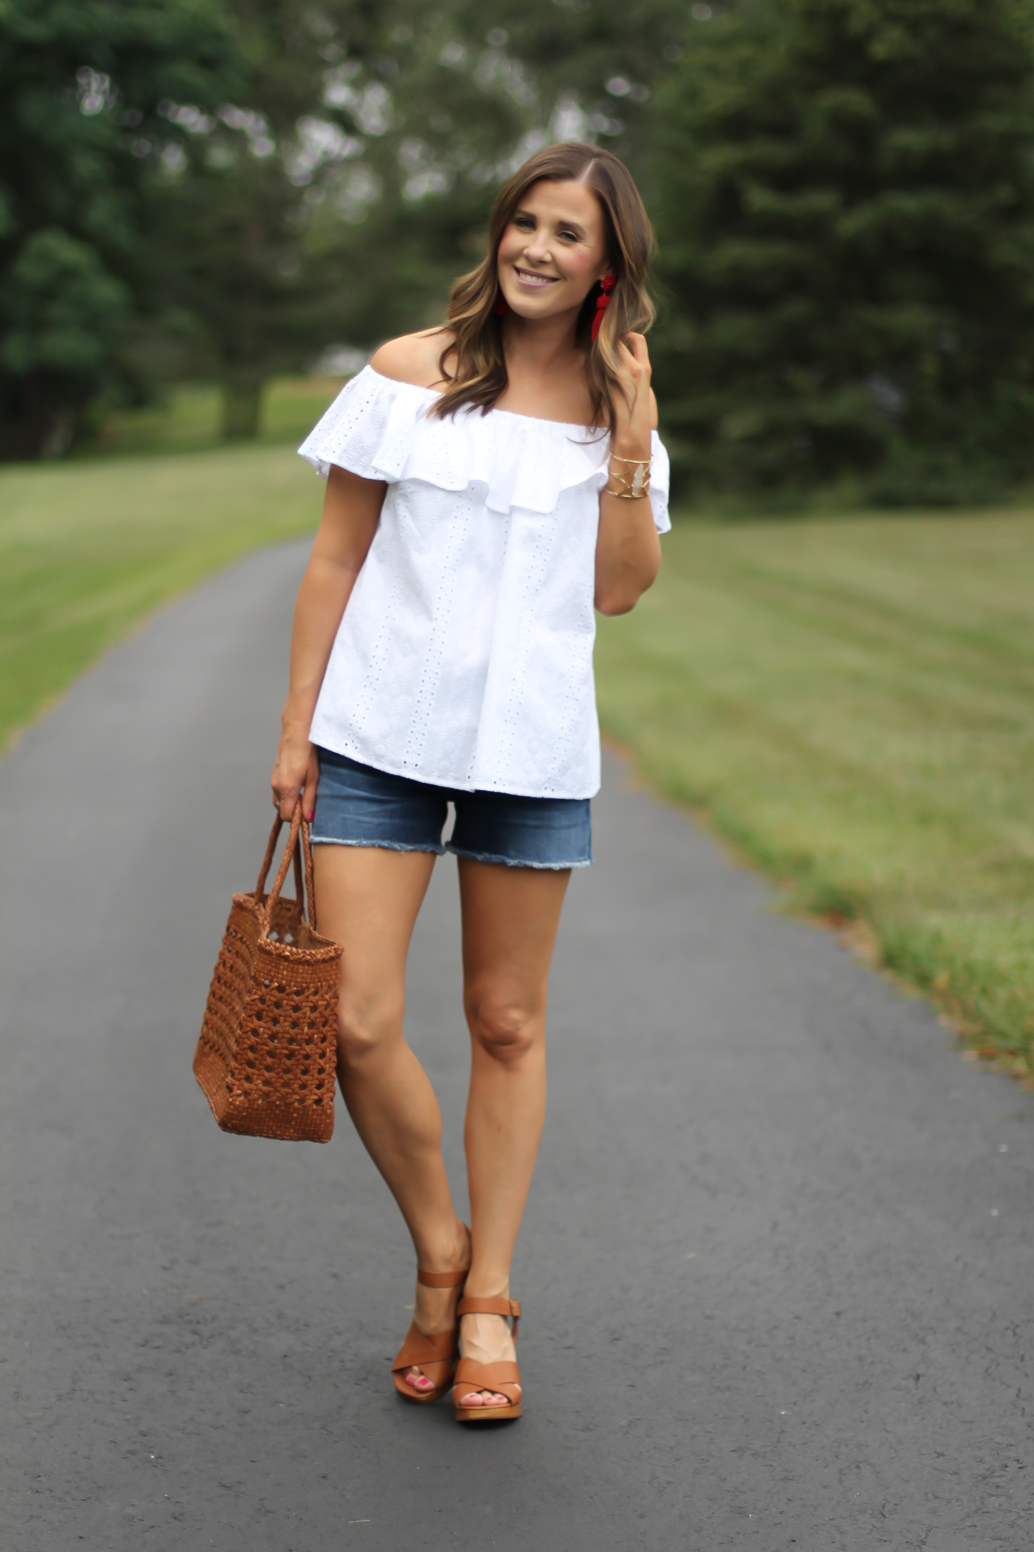 White Eyelet Off the Shoulder Blouse, Dark Rinse Cutoff Denim Shorts, Tan Leather Wedge Sandal, Leather Basket Tote, Red Tassel Earrings, Anthropologie, Citizens of Humanity, Madewell, J.Crew, Lisi Lerch 3